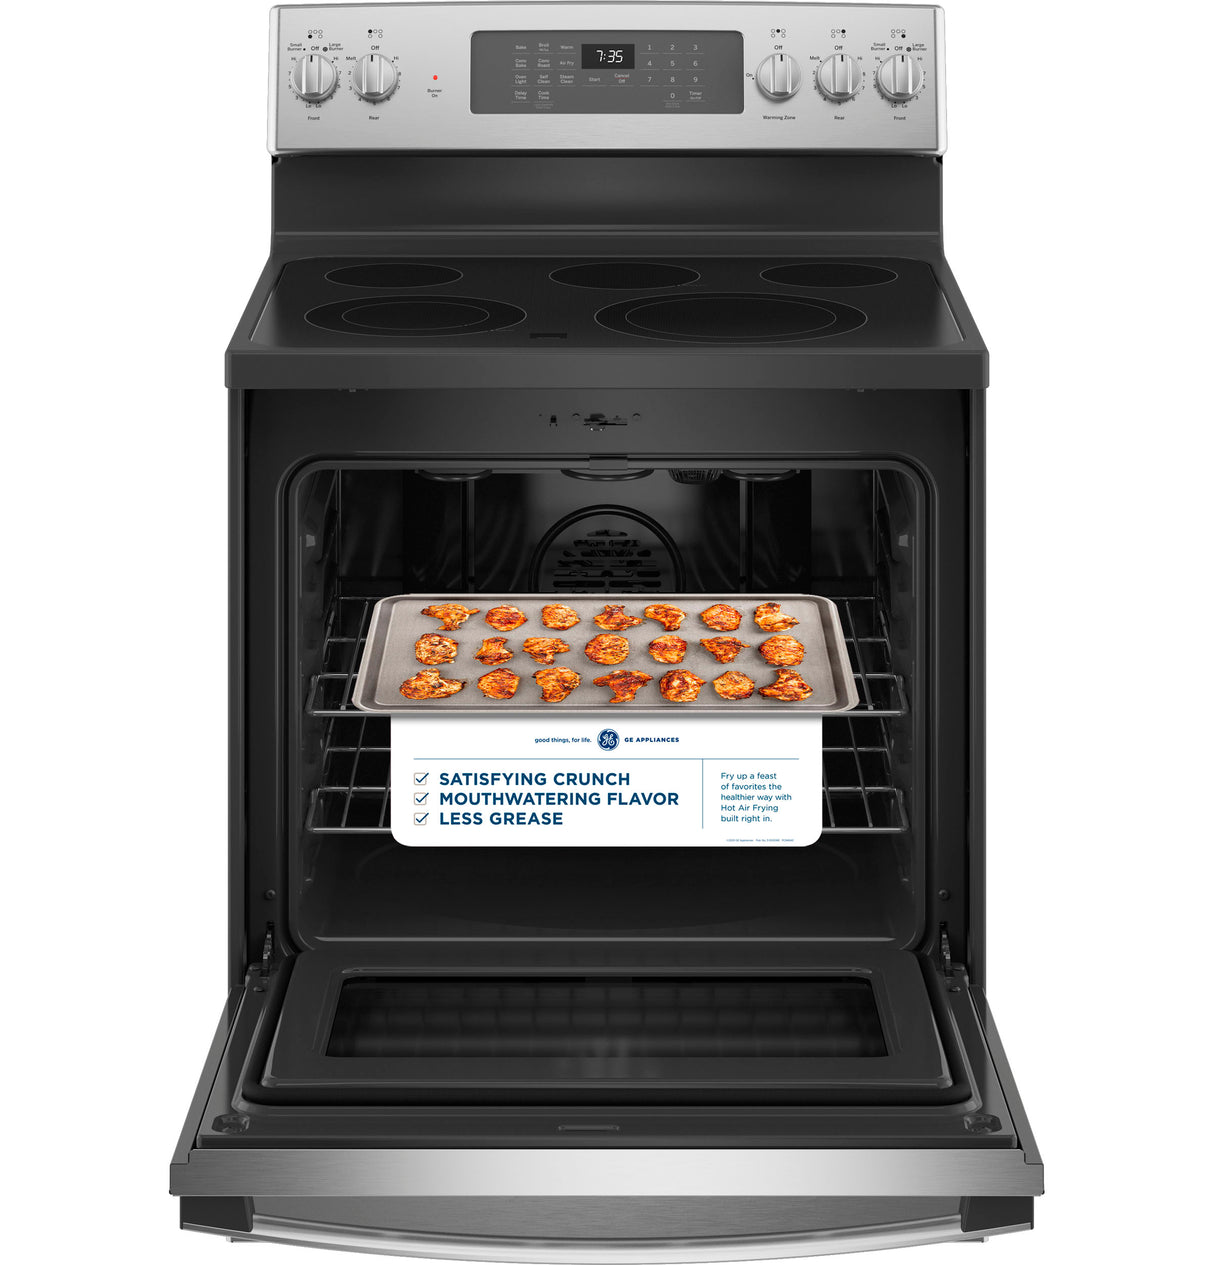 GE(R) 30" Free-Standing Electric Convection Range with No Preheat Air Fry - (JB735SPSS)